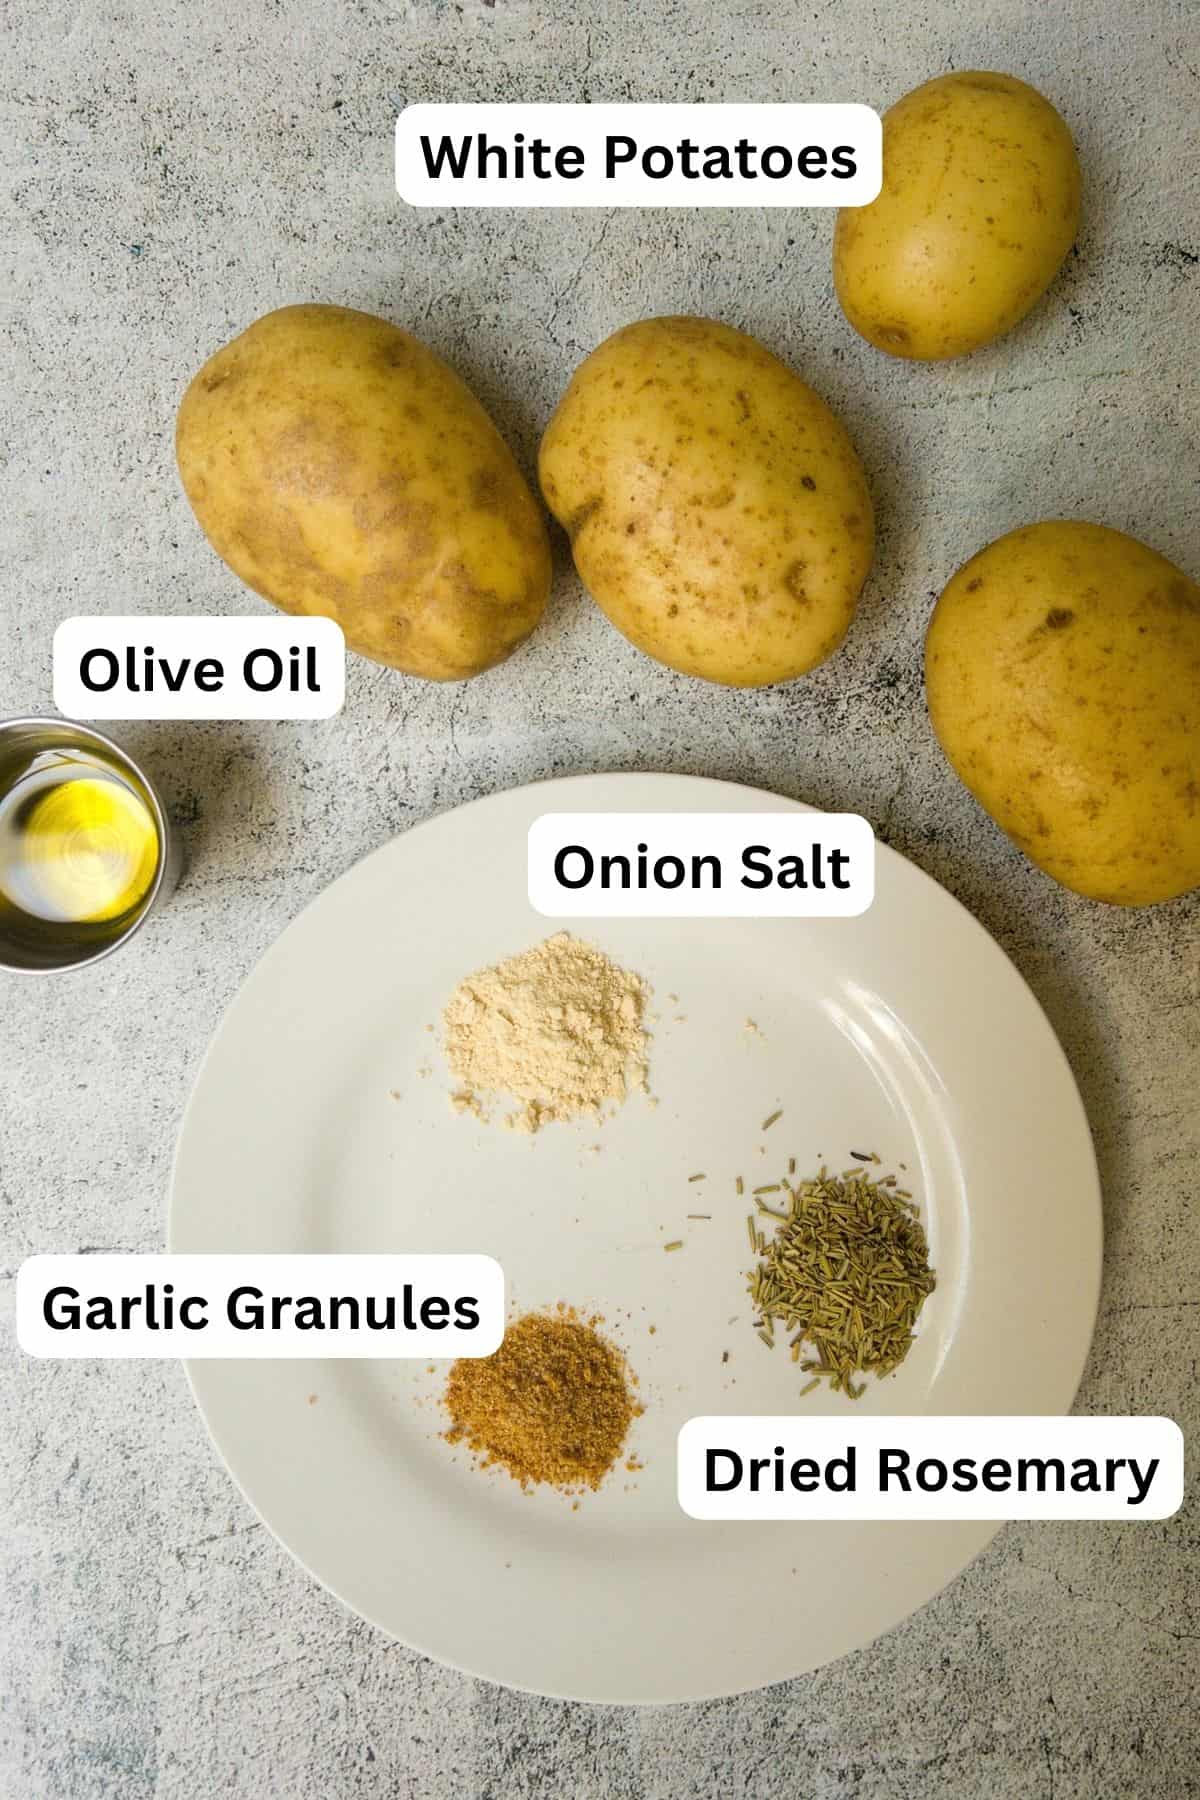 ingredients laid out to make slow cooker roast potatoes.